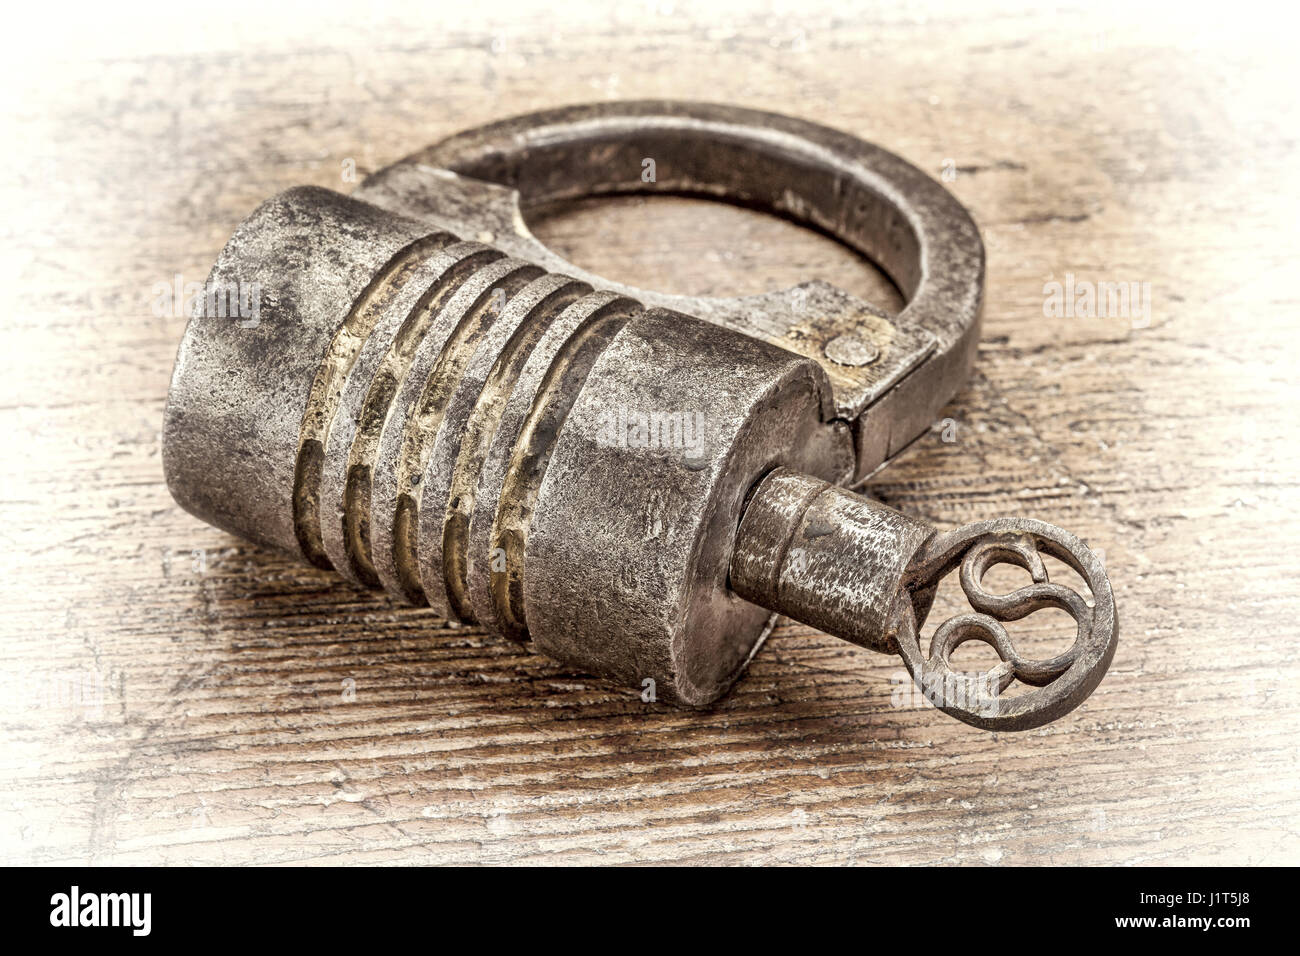 Vintage round shape hand crafted screw type iron padlock with a key on rustic wood, retro sepia toning Stock Photo